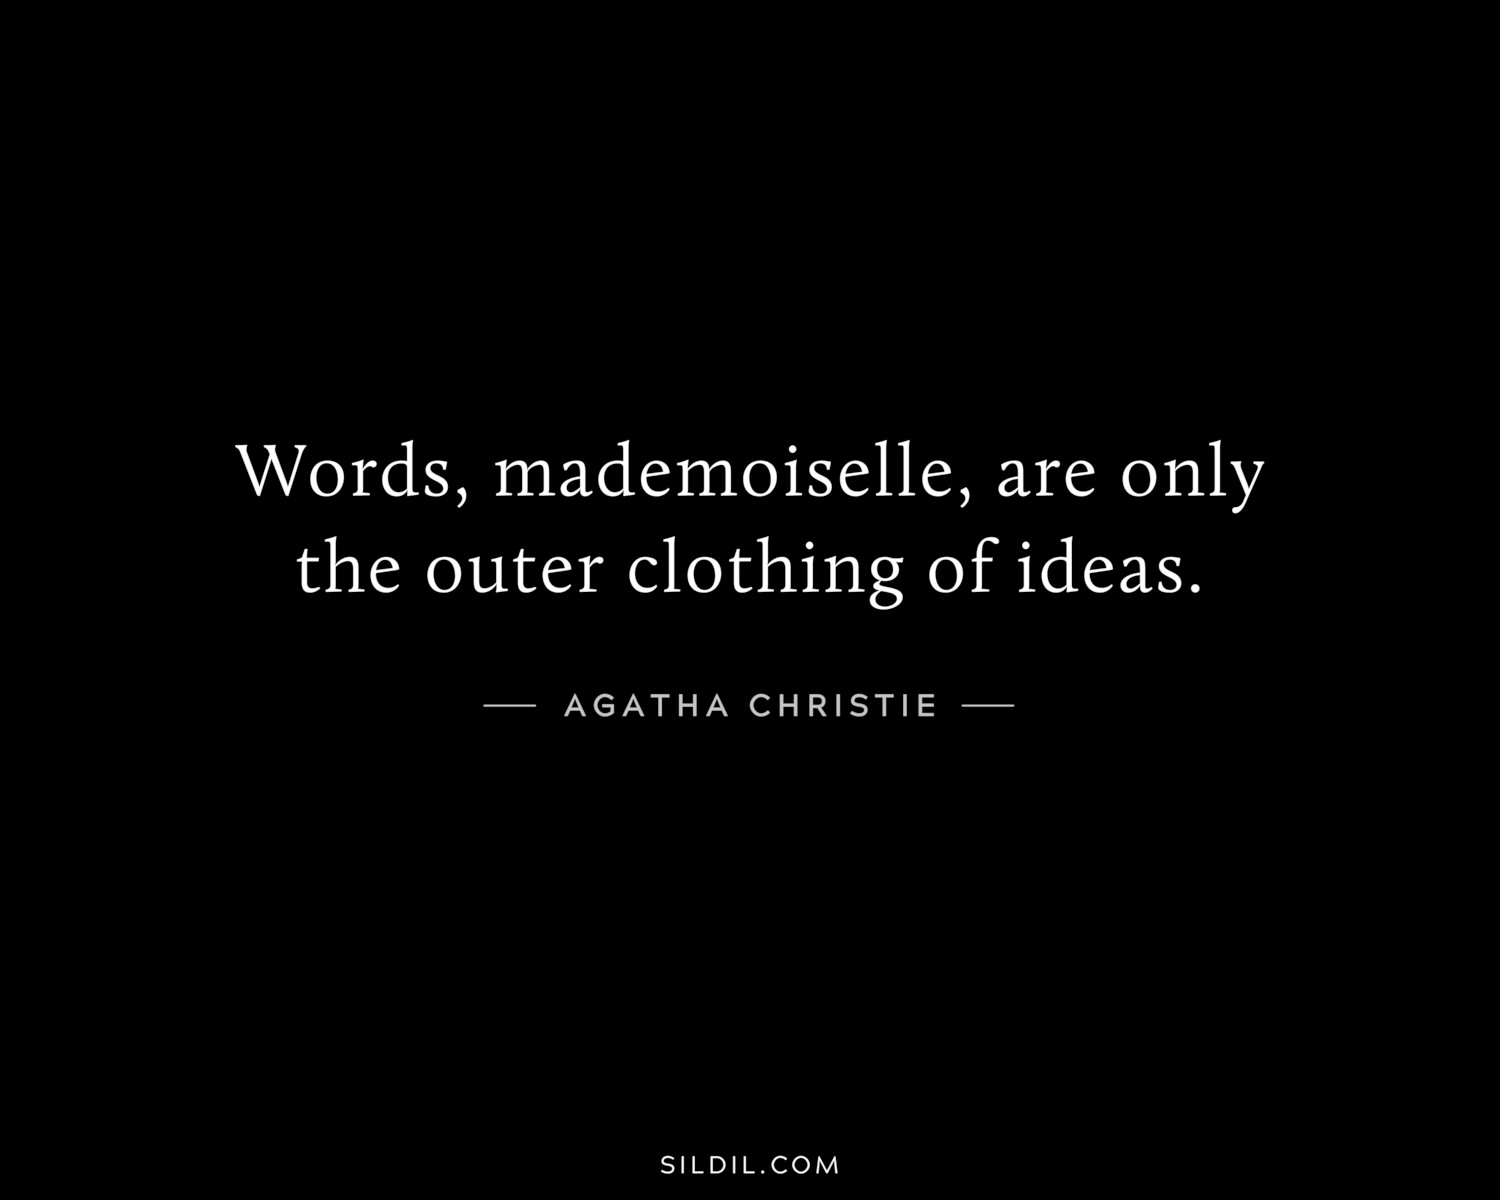 Words, mademoiselle, are only the outer clothing of ideas.